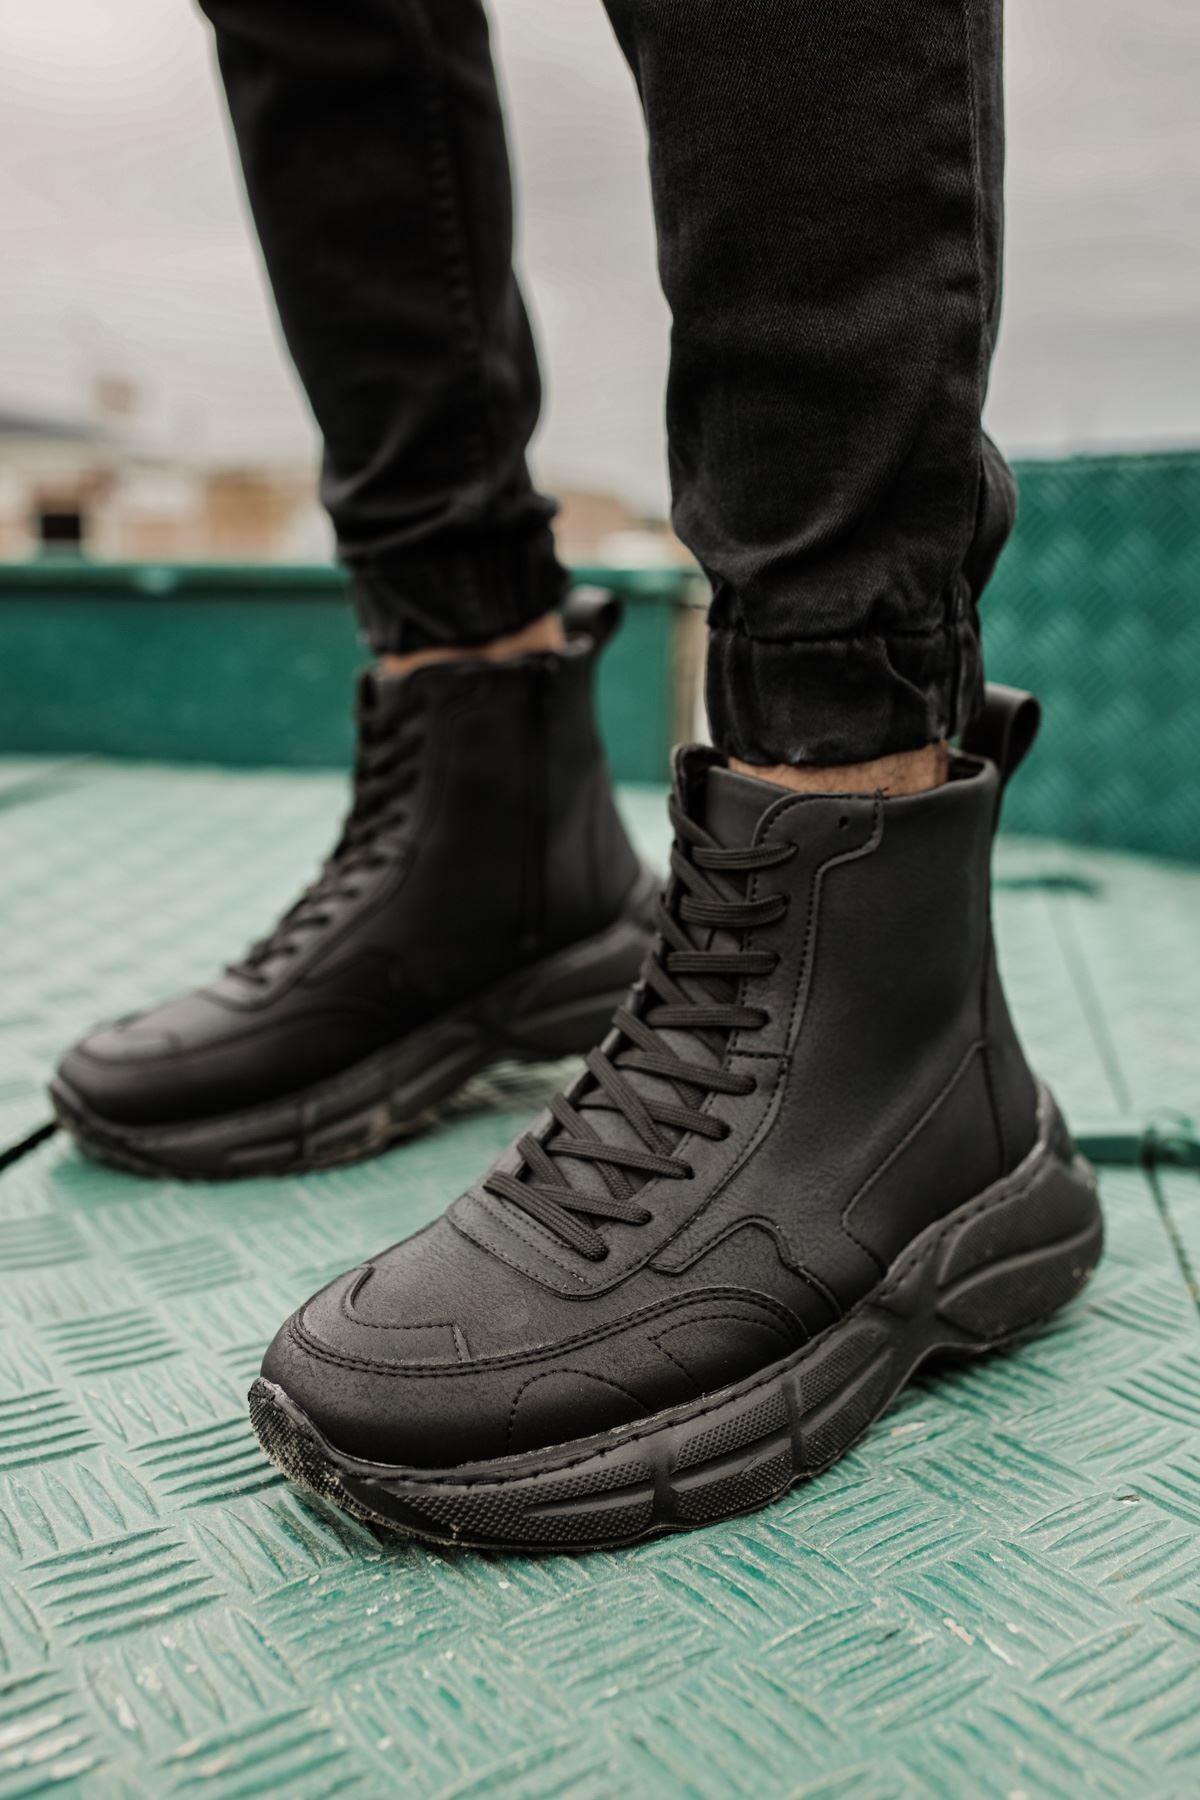 CH077 Men's Full Black Casual Sneaker Sports Boots - STREETMODE ™